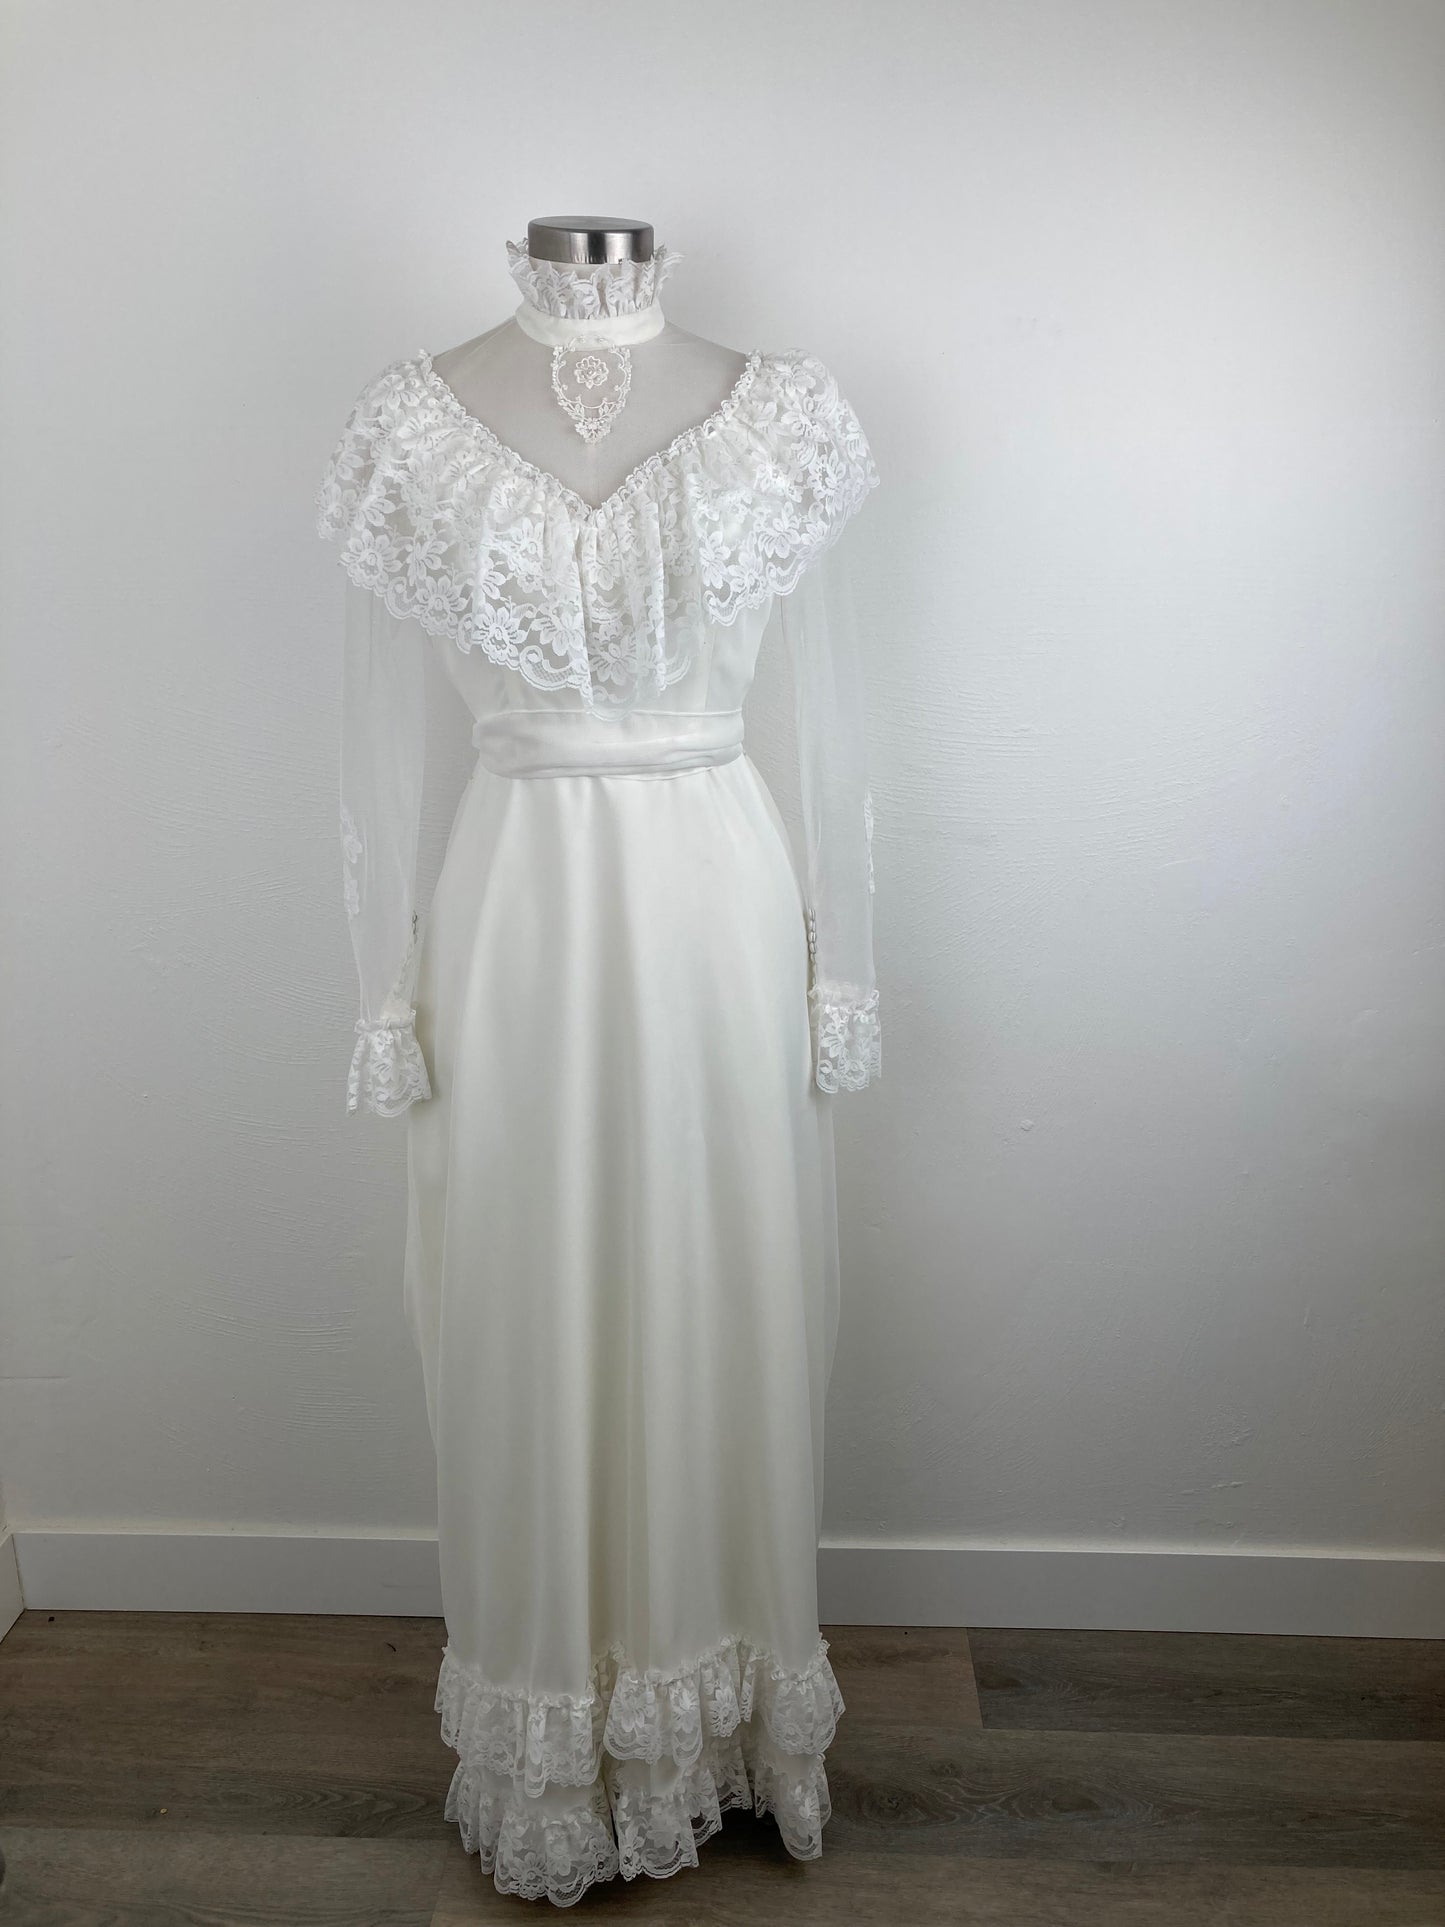 70s Chiffon and Lace Wedding Dress, 70s Bridal Gown, Victorian Style Wedding Dress, Boho "Victoria" Wedding Gown, Size M